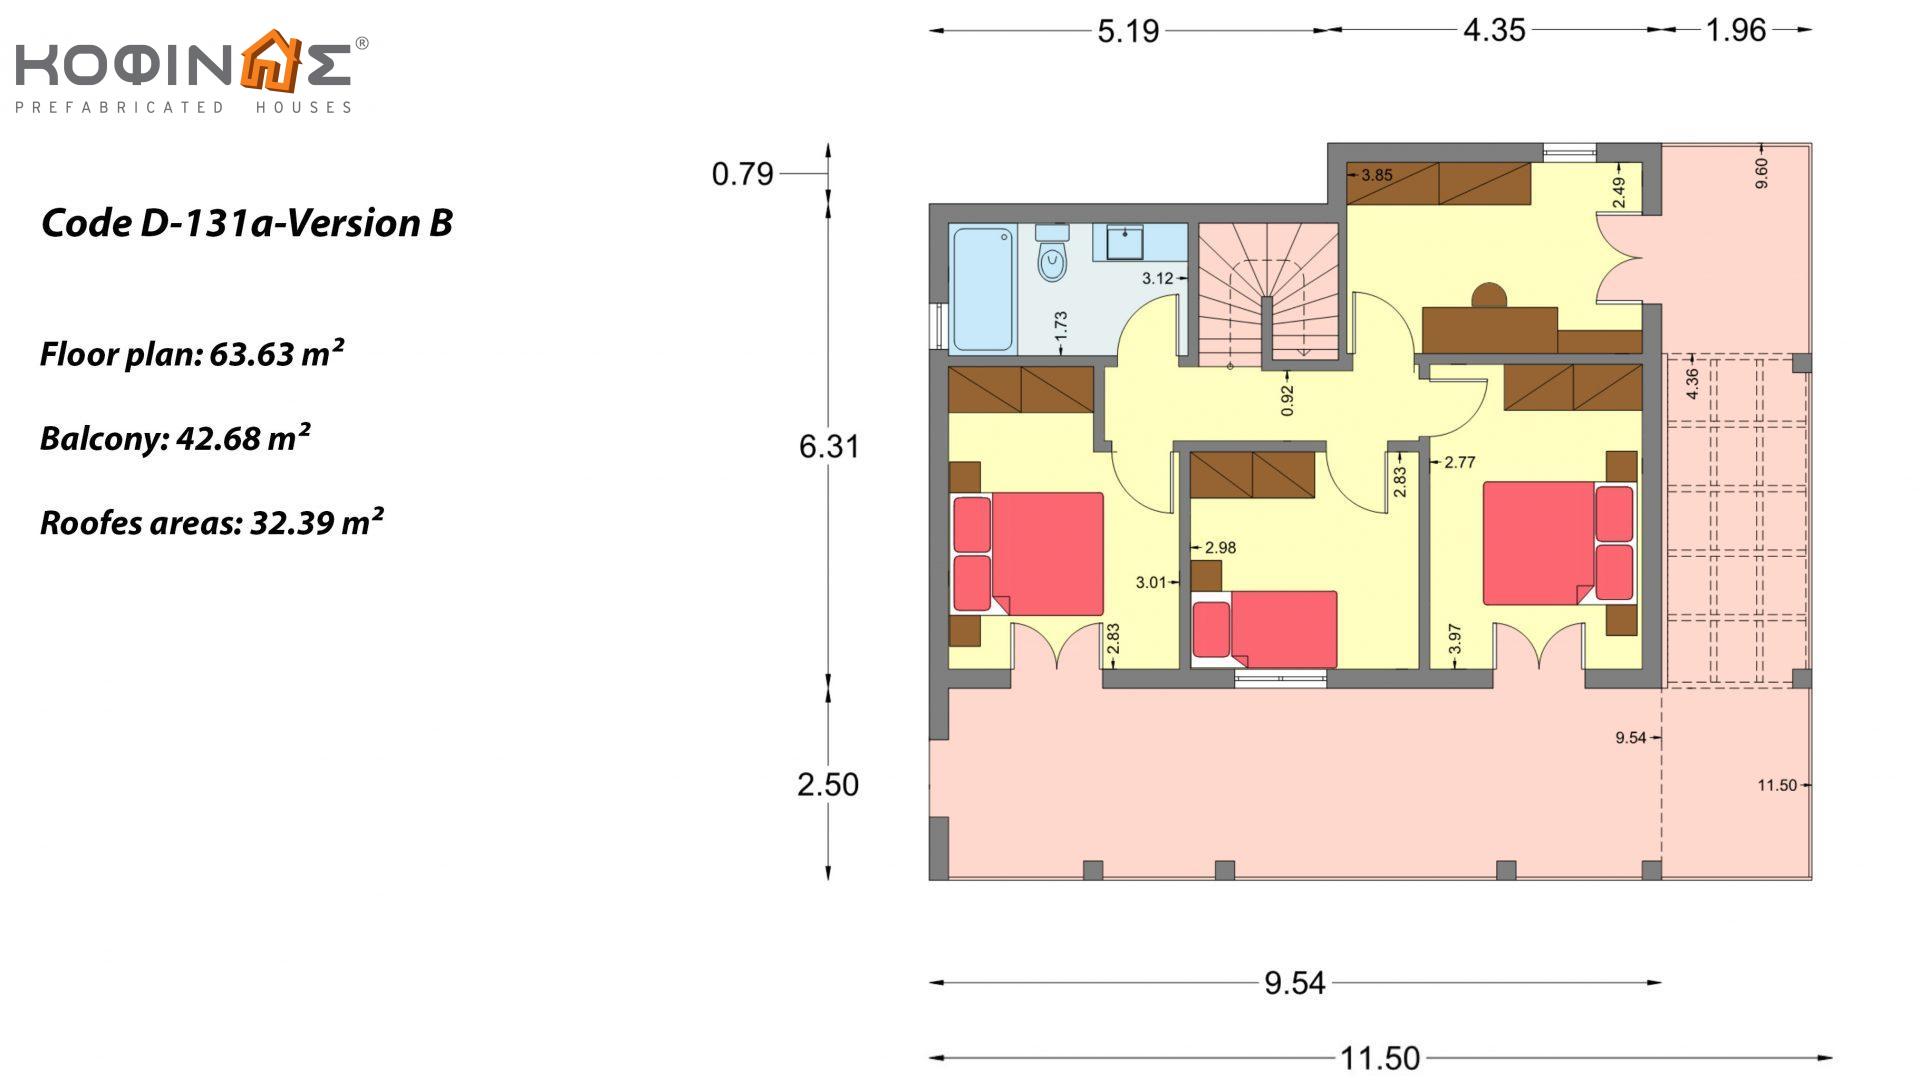 2-story house D-131a, total surface of 131.23 m² (Version A) and 142.65 m² (Version B) ,roofed areas 63.69 m²,balconies 54.11 m²(Version A) and 42.68 m²(Version B)